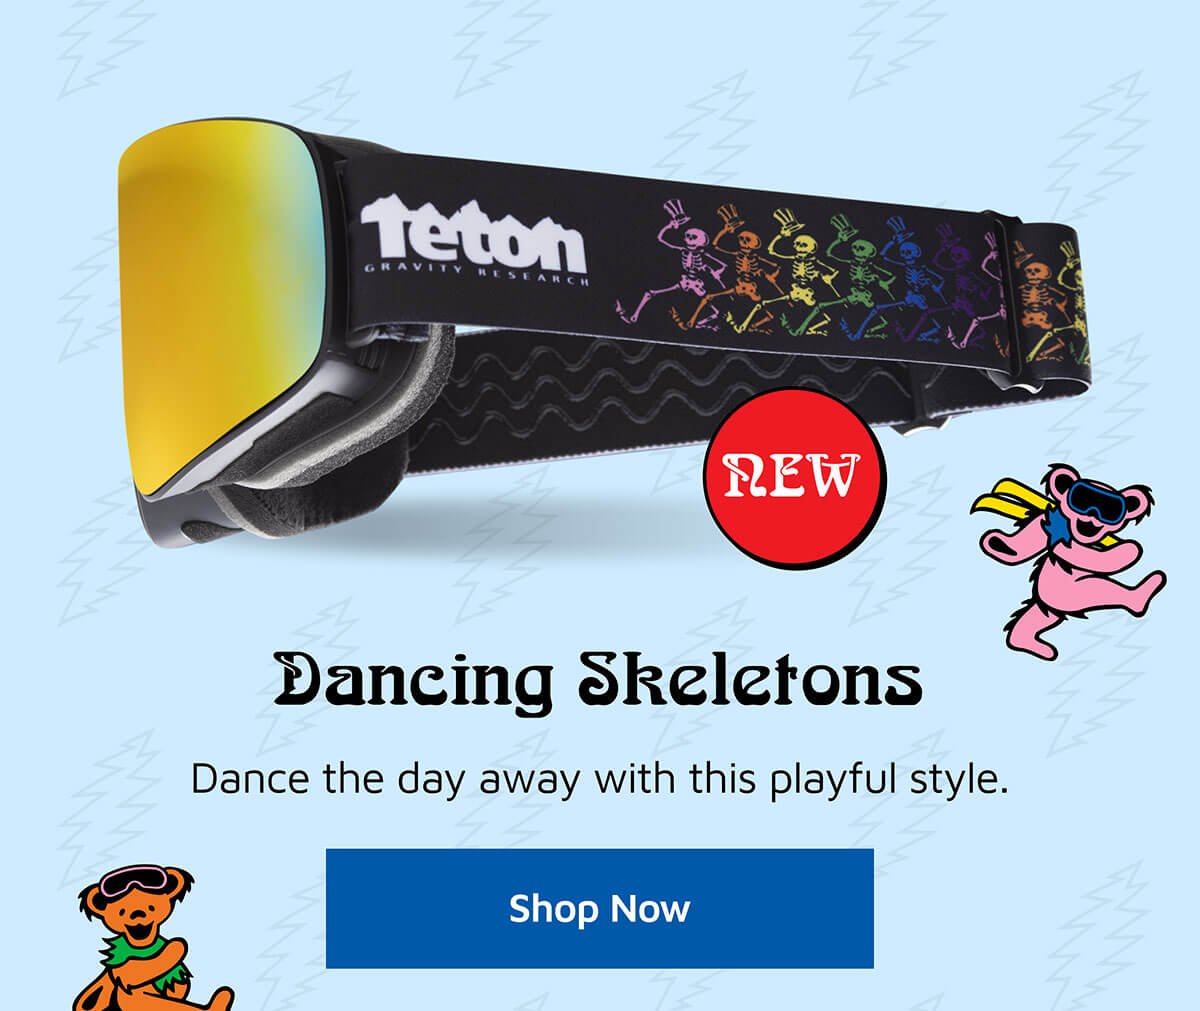 Dancing Skeletons. Dance the day away with this playful style.